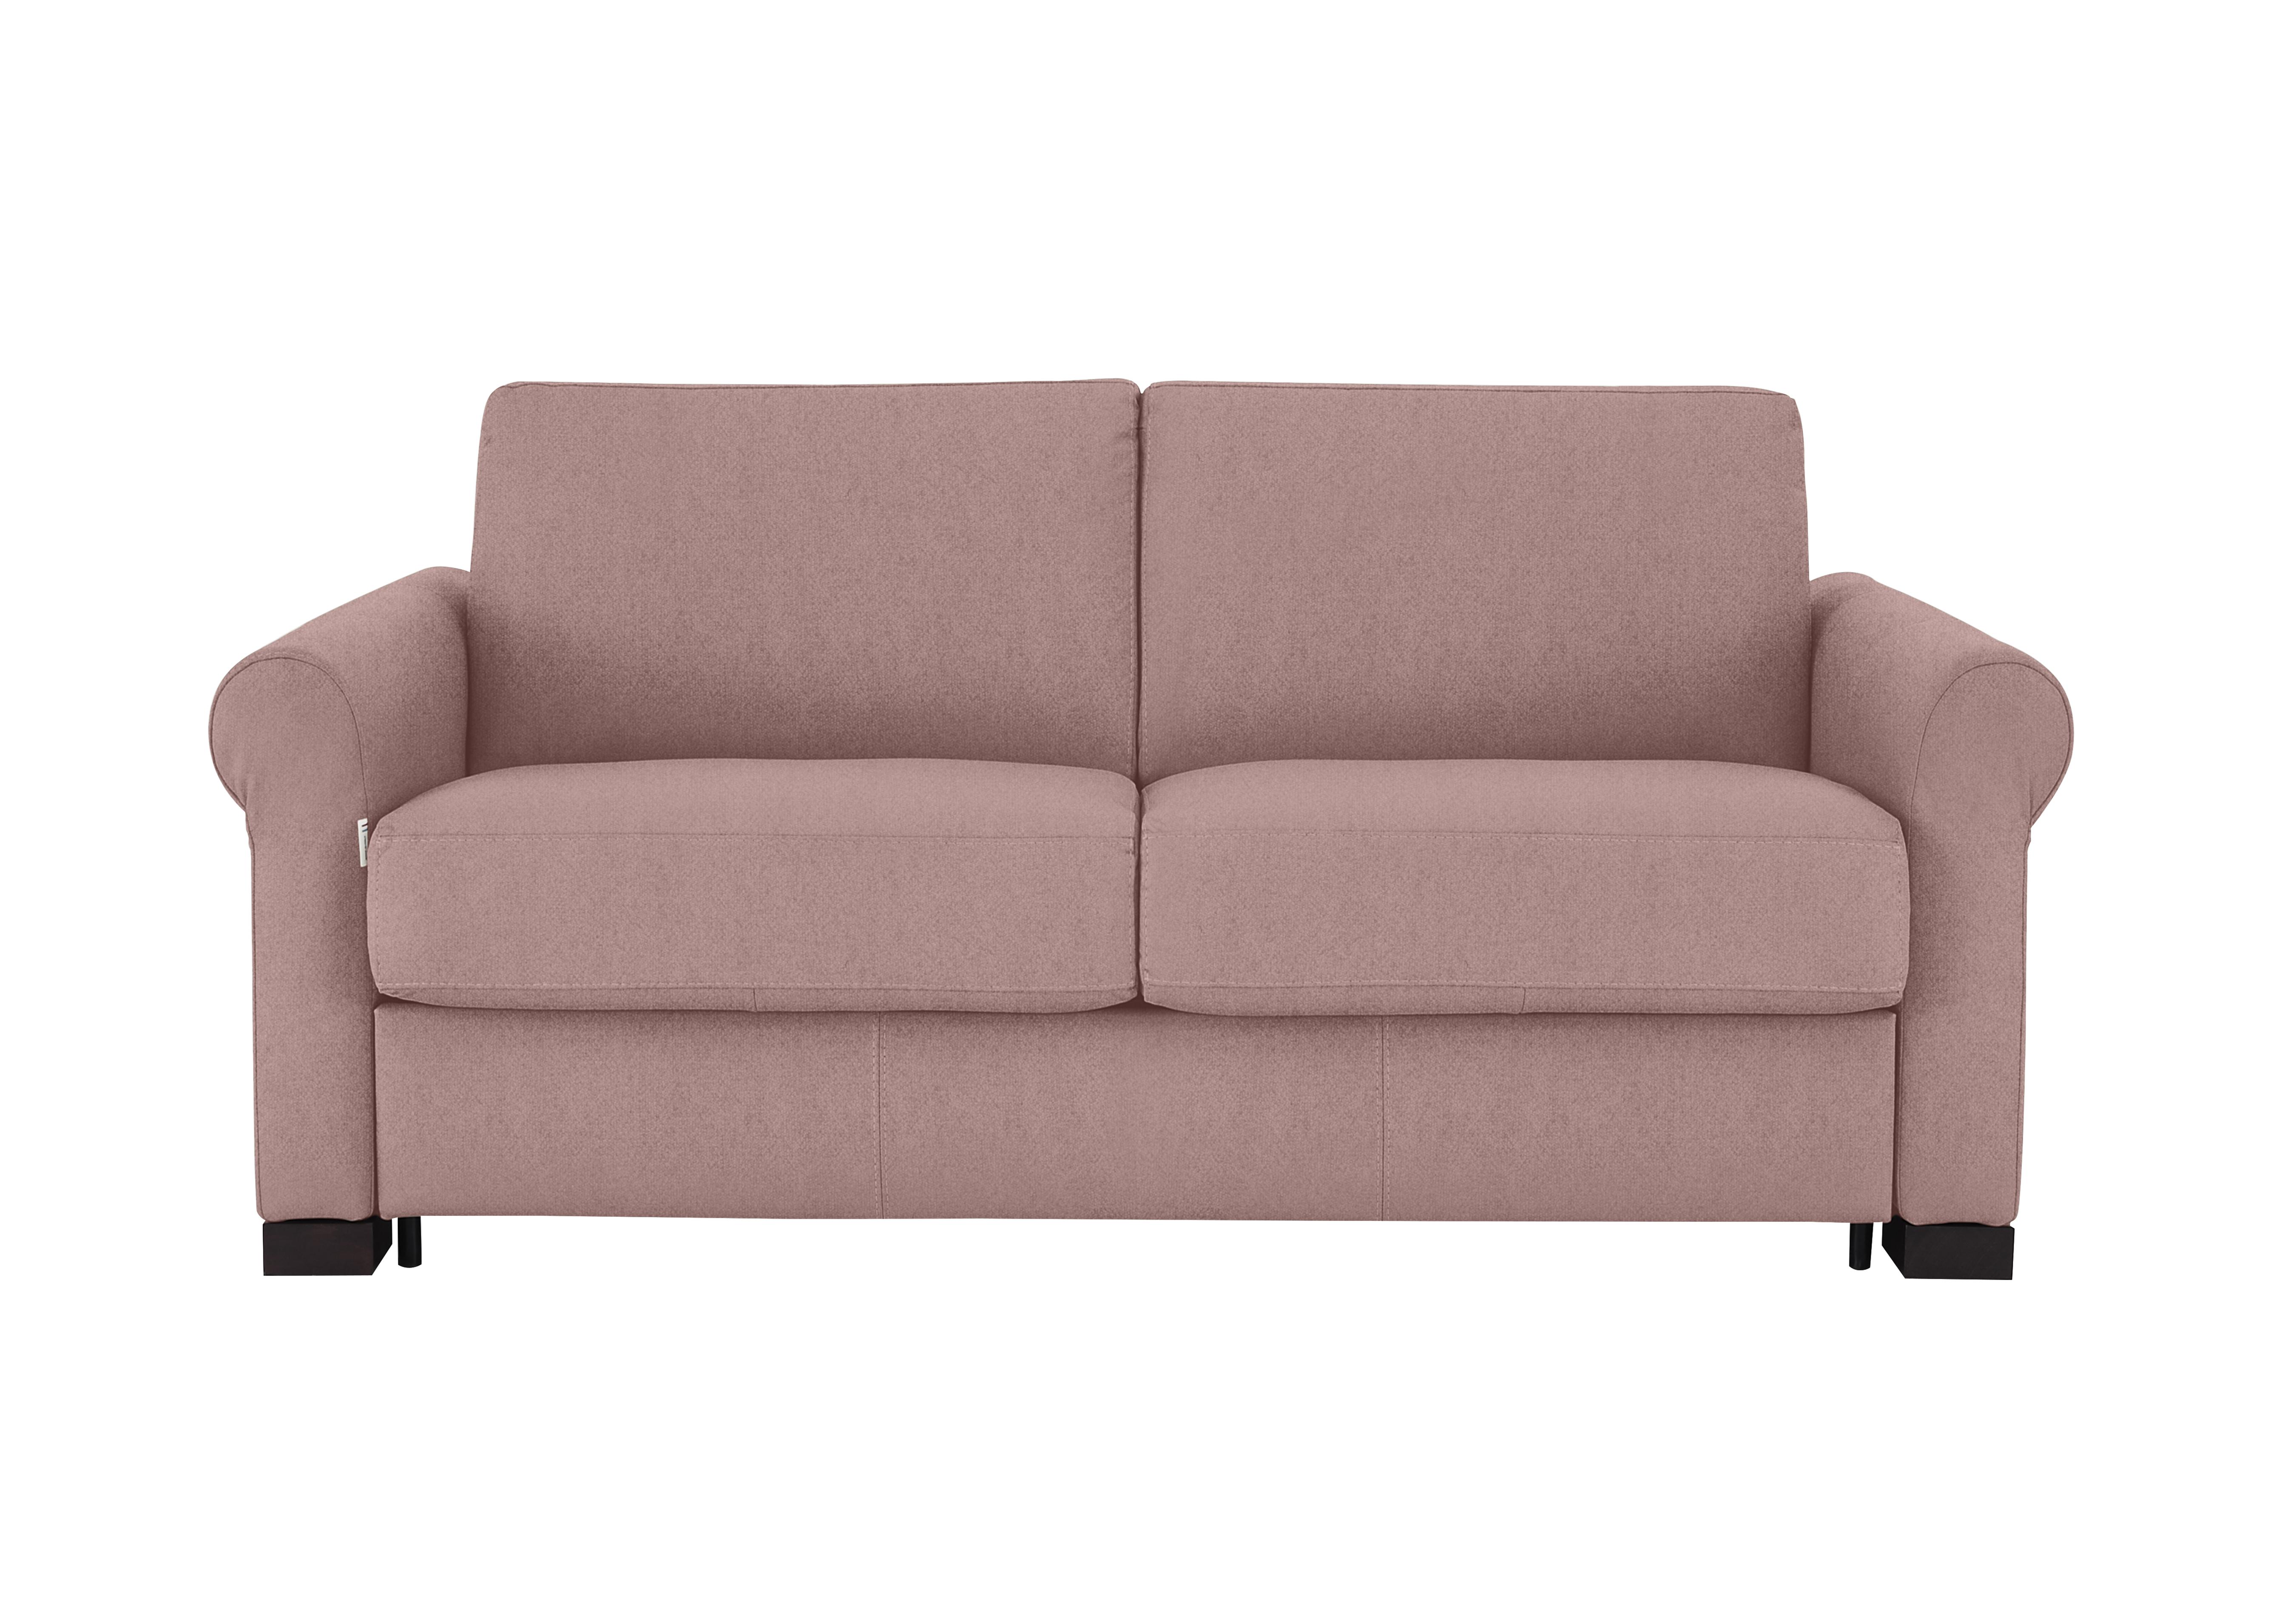 Alcova 2 Seater Fabric Sofa Bed with Scroll Arms in Fuente Coral on Furniture Village